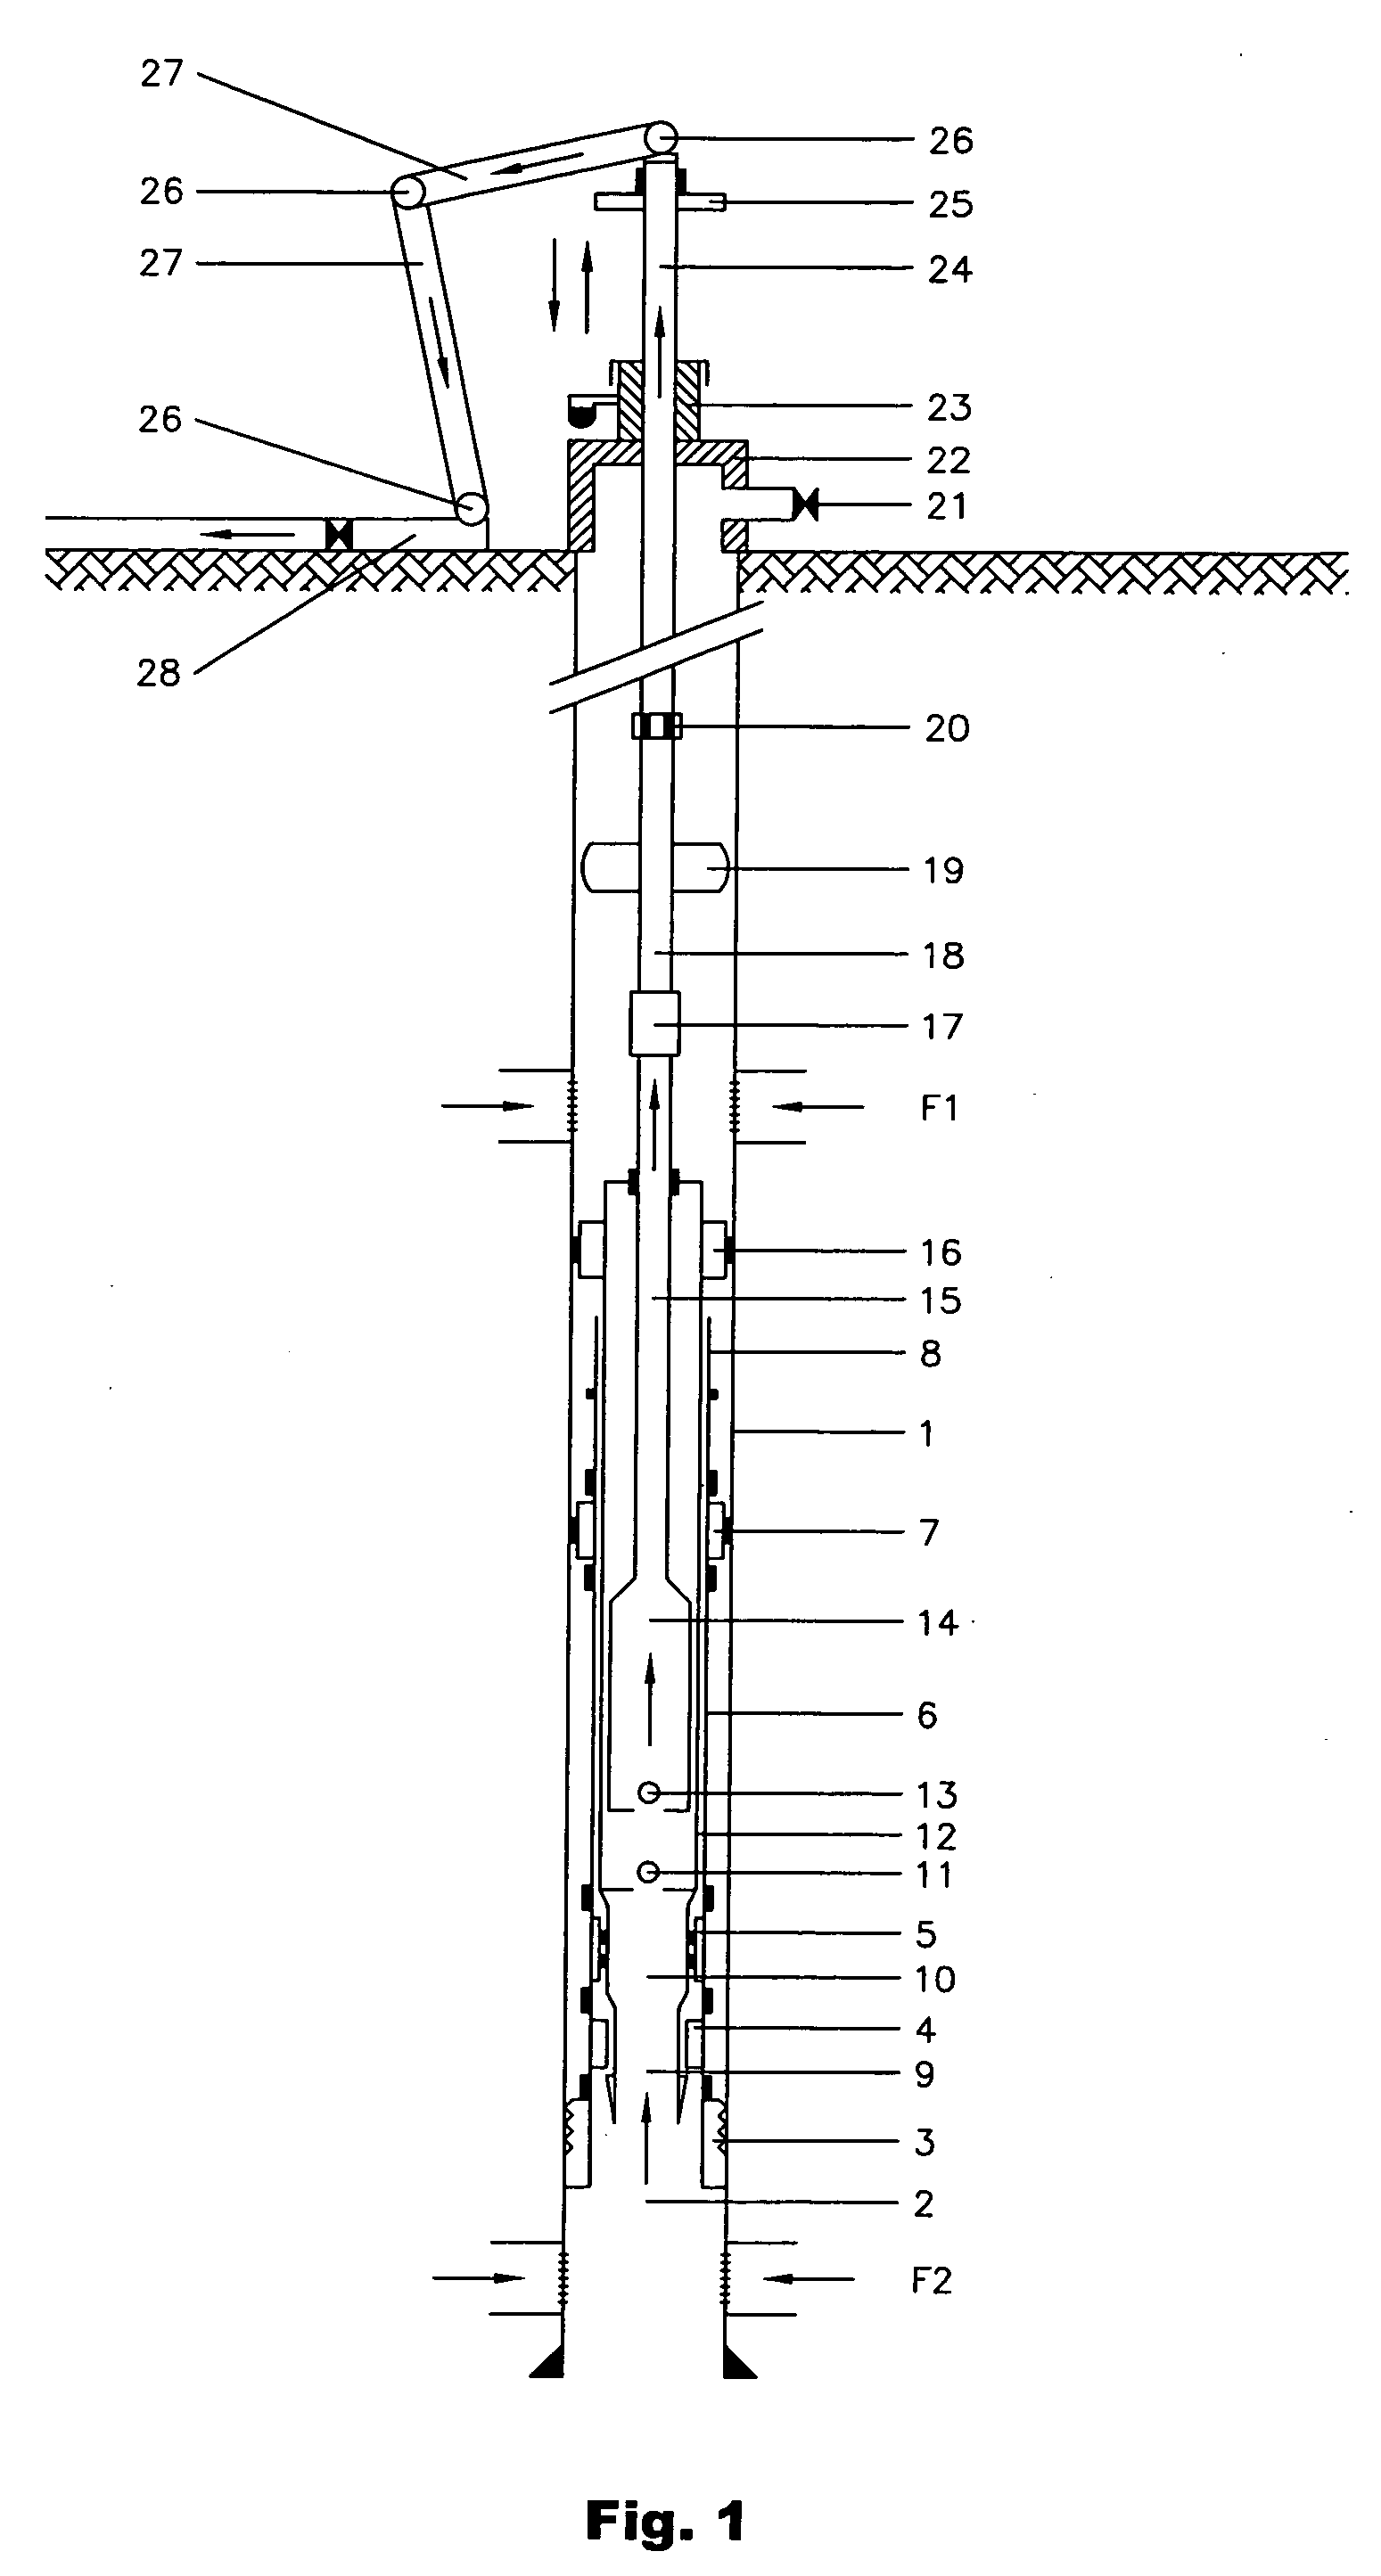 Assembly and method of alternative pumping using hollow rods without tubing